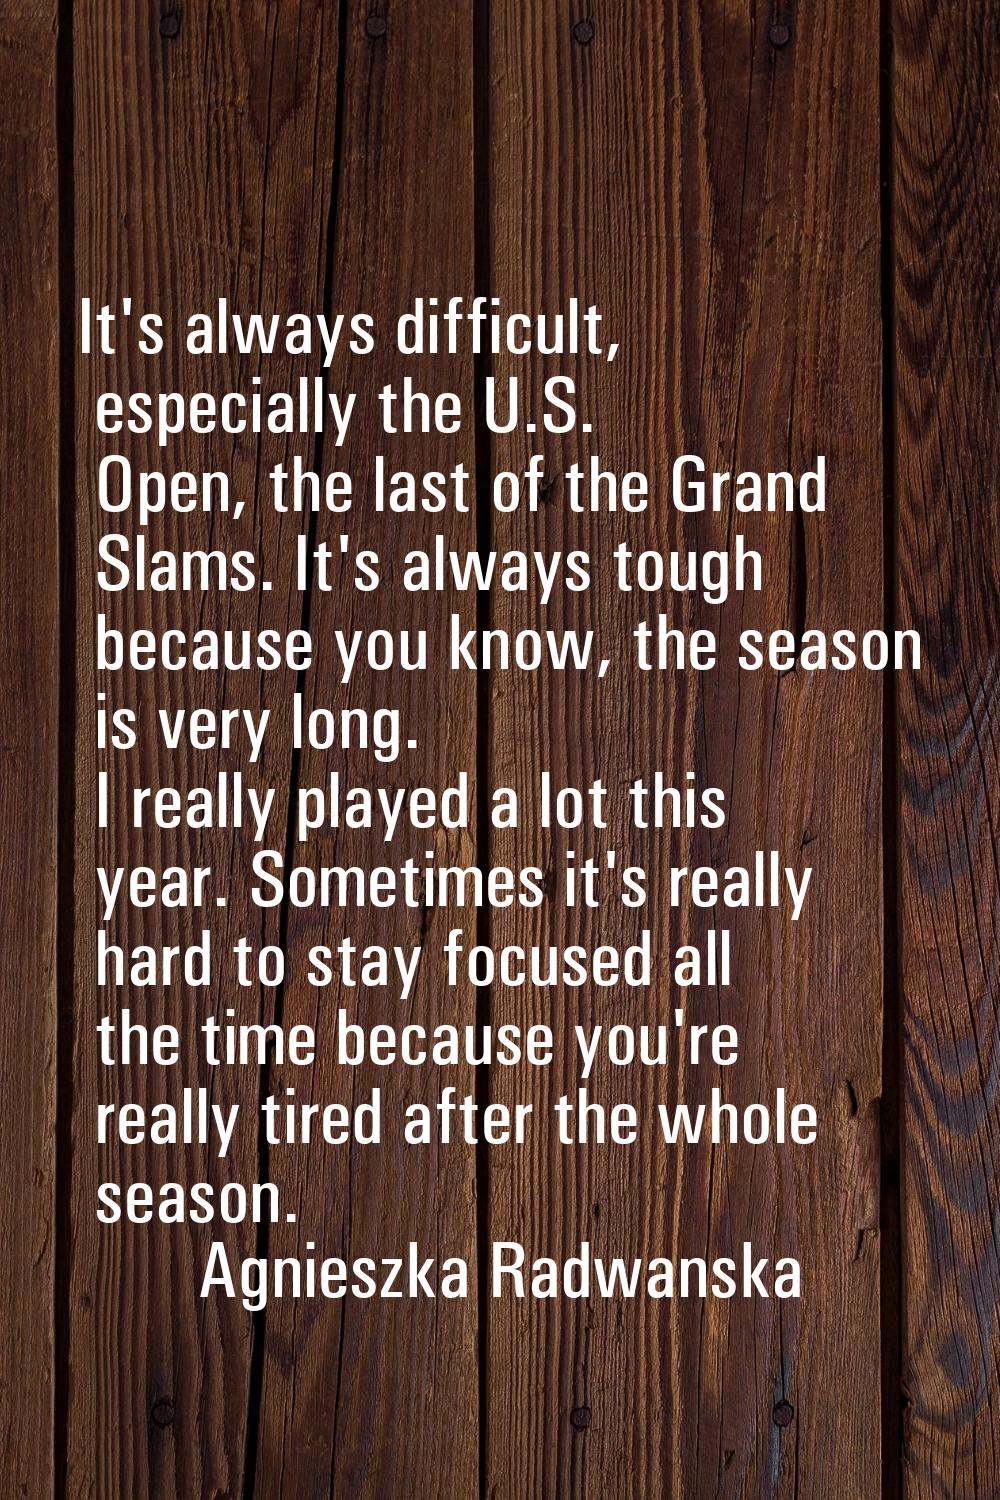 It's always difficult, especially the U.S. Open, the last of the Grand Slams. It's always tough bec